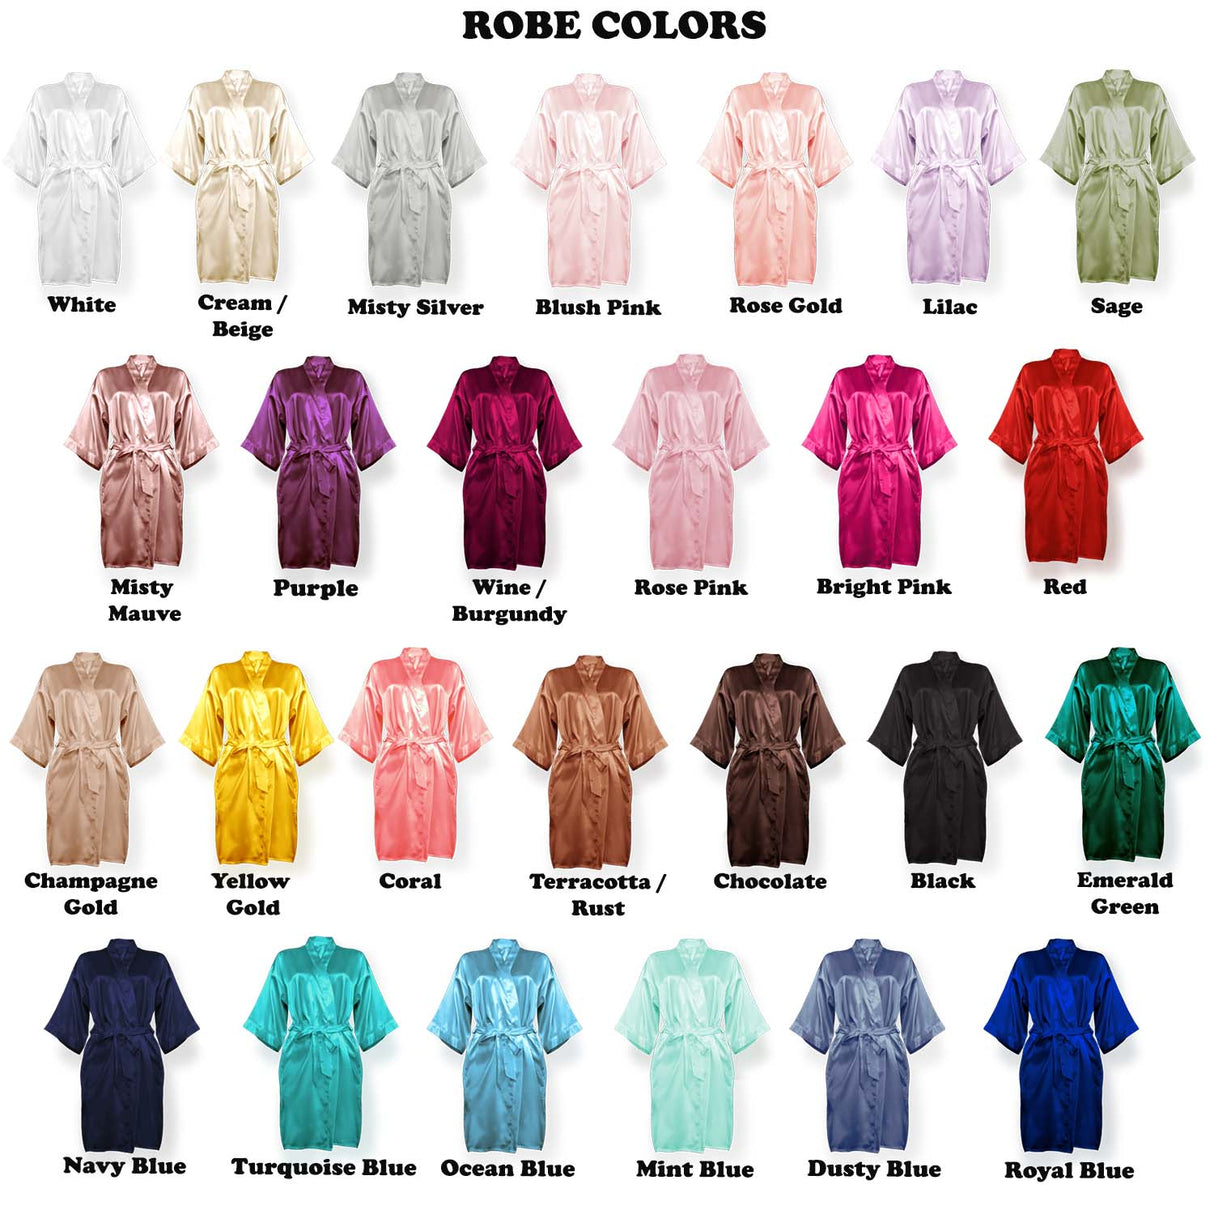 Personalized Solid Satin Robes, Text Color and Robe Colors. royal blue Robe, White Robe, Tiffany Blue Robe, Turquoise Blue Robe, Mint Robe, Dusty Blue Robe, Rose Pink Robe, Navy Blue Robe, Champagne Robe, Emerald Green Robe, Rose Gold Robe, Burgundy Robe. all SKUs 